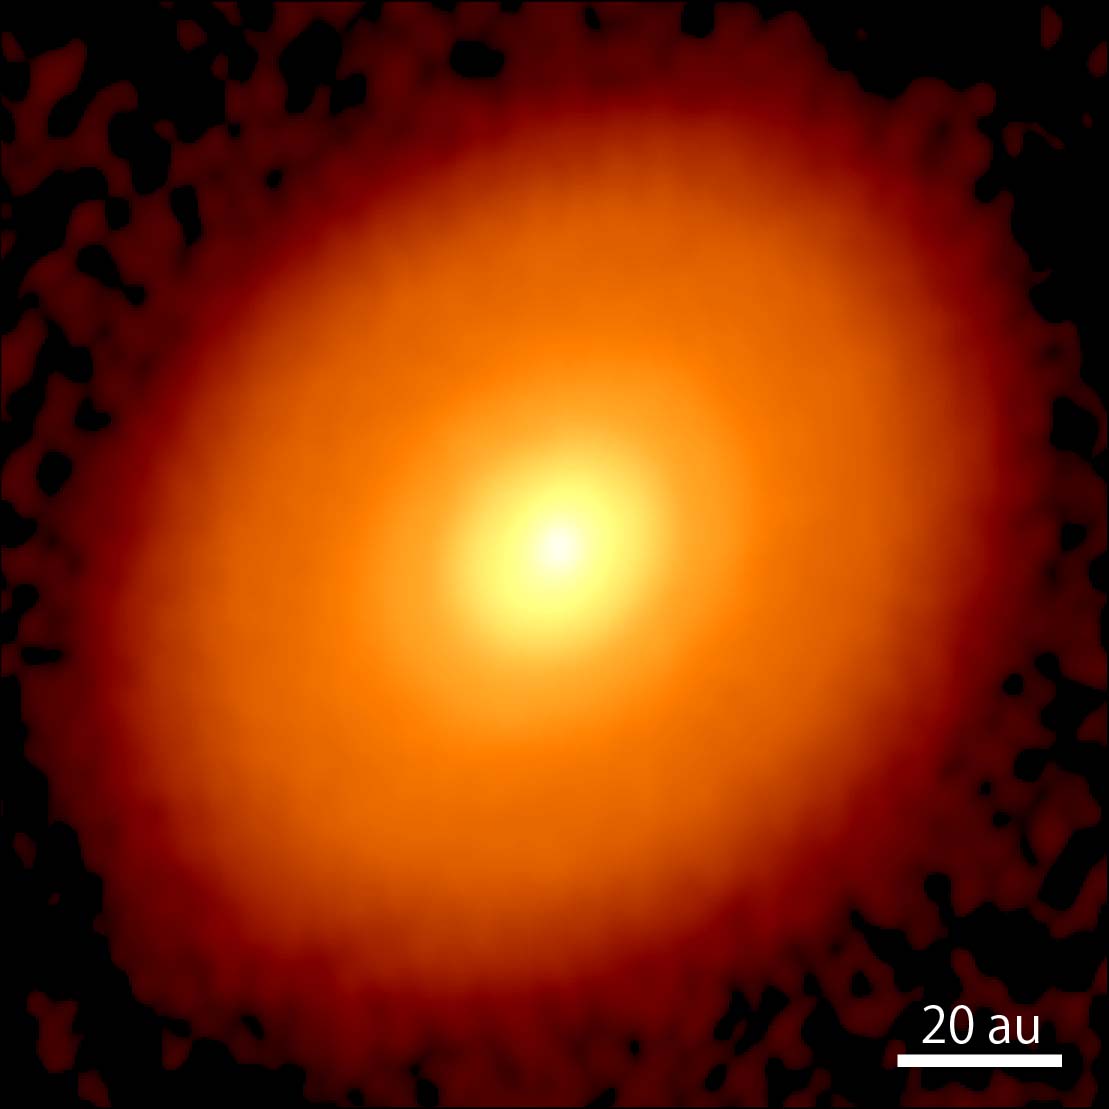 An image of an orange star with a smooth protoplanetary disk.